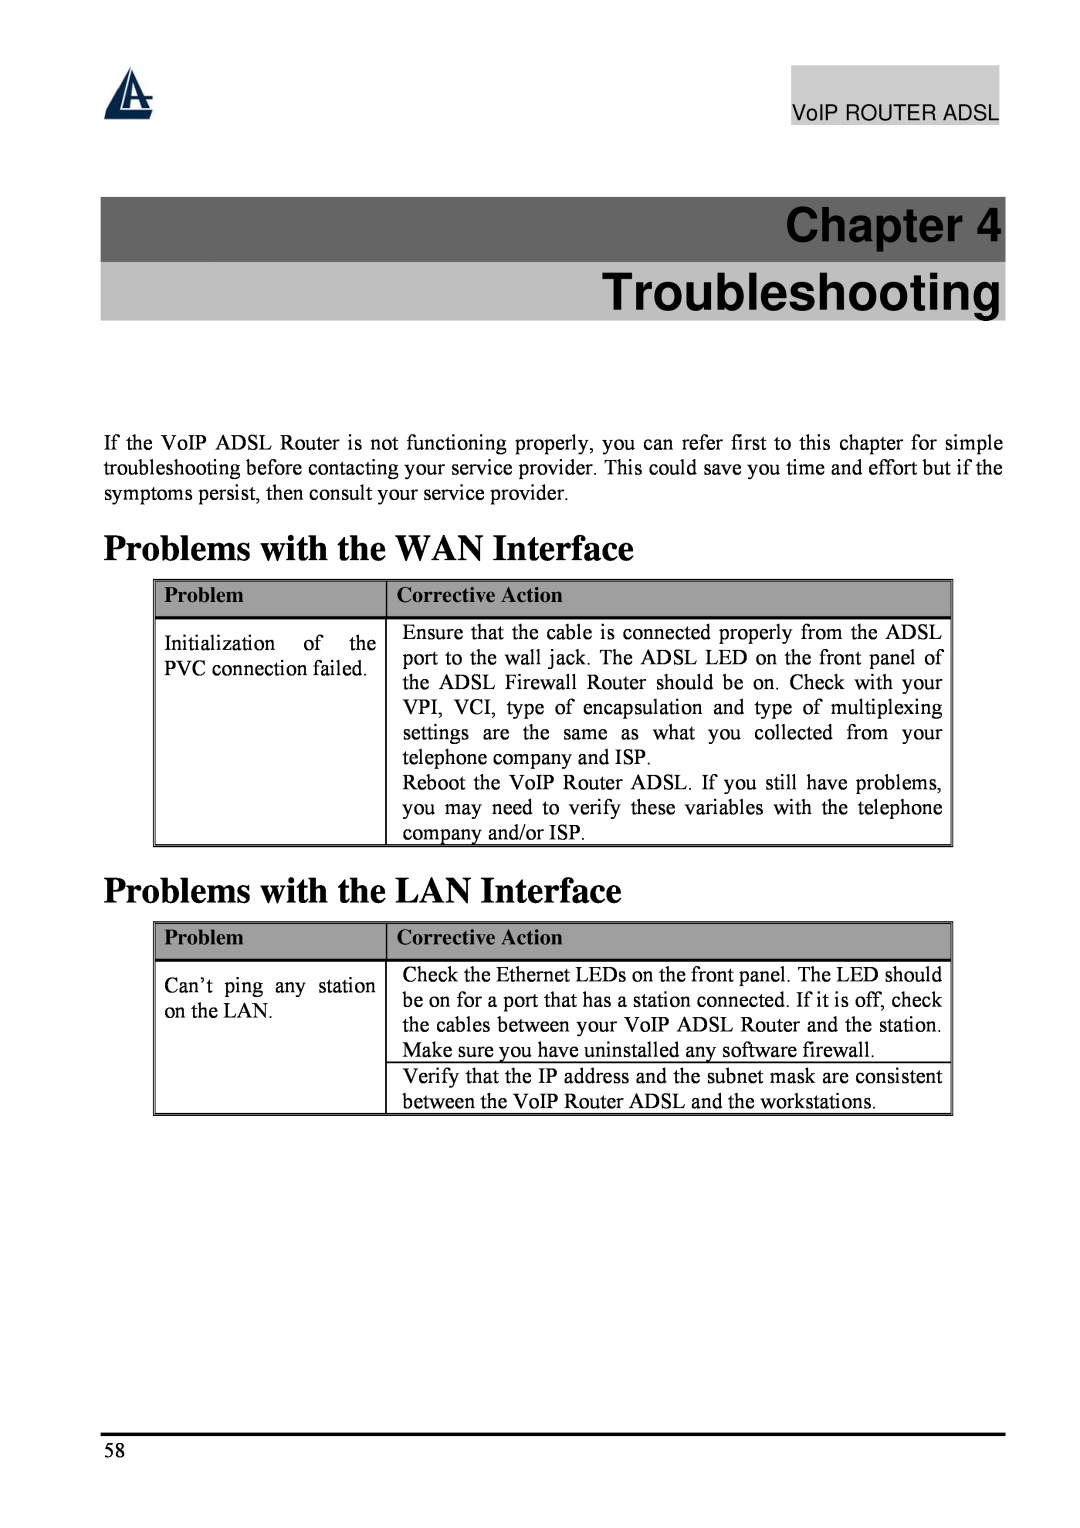 Atlantis Land A02-RAV211 manual Troubleshooting, Problems with the WAN Interface, Problems with the LAN Interface, Chapter 